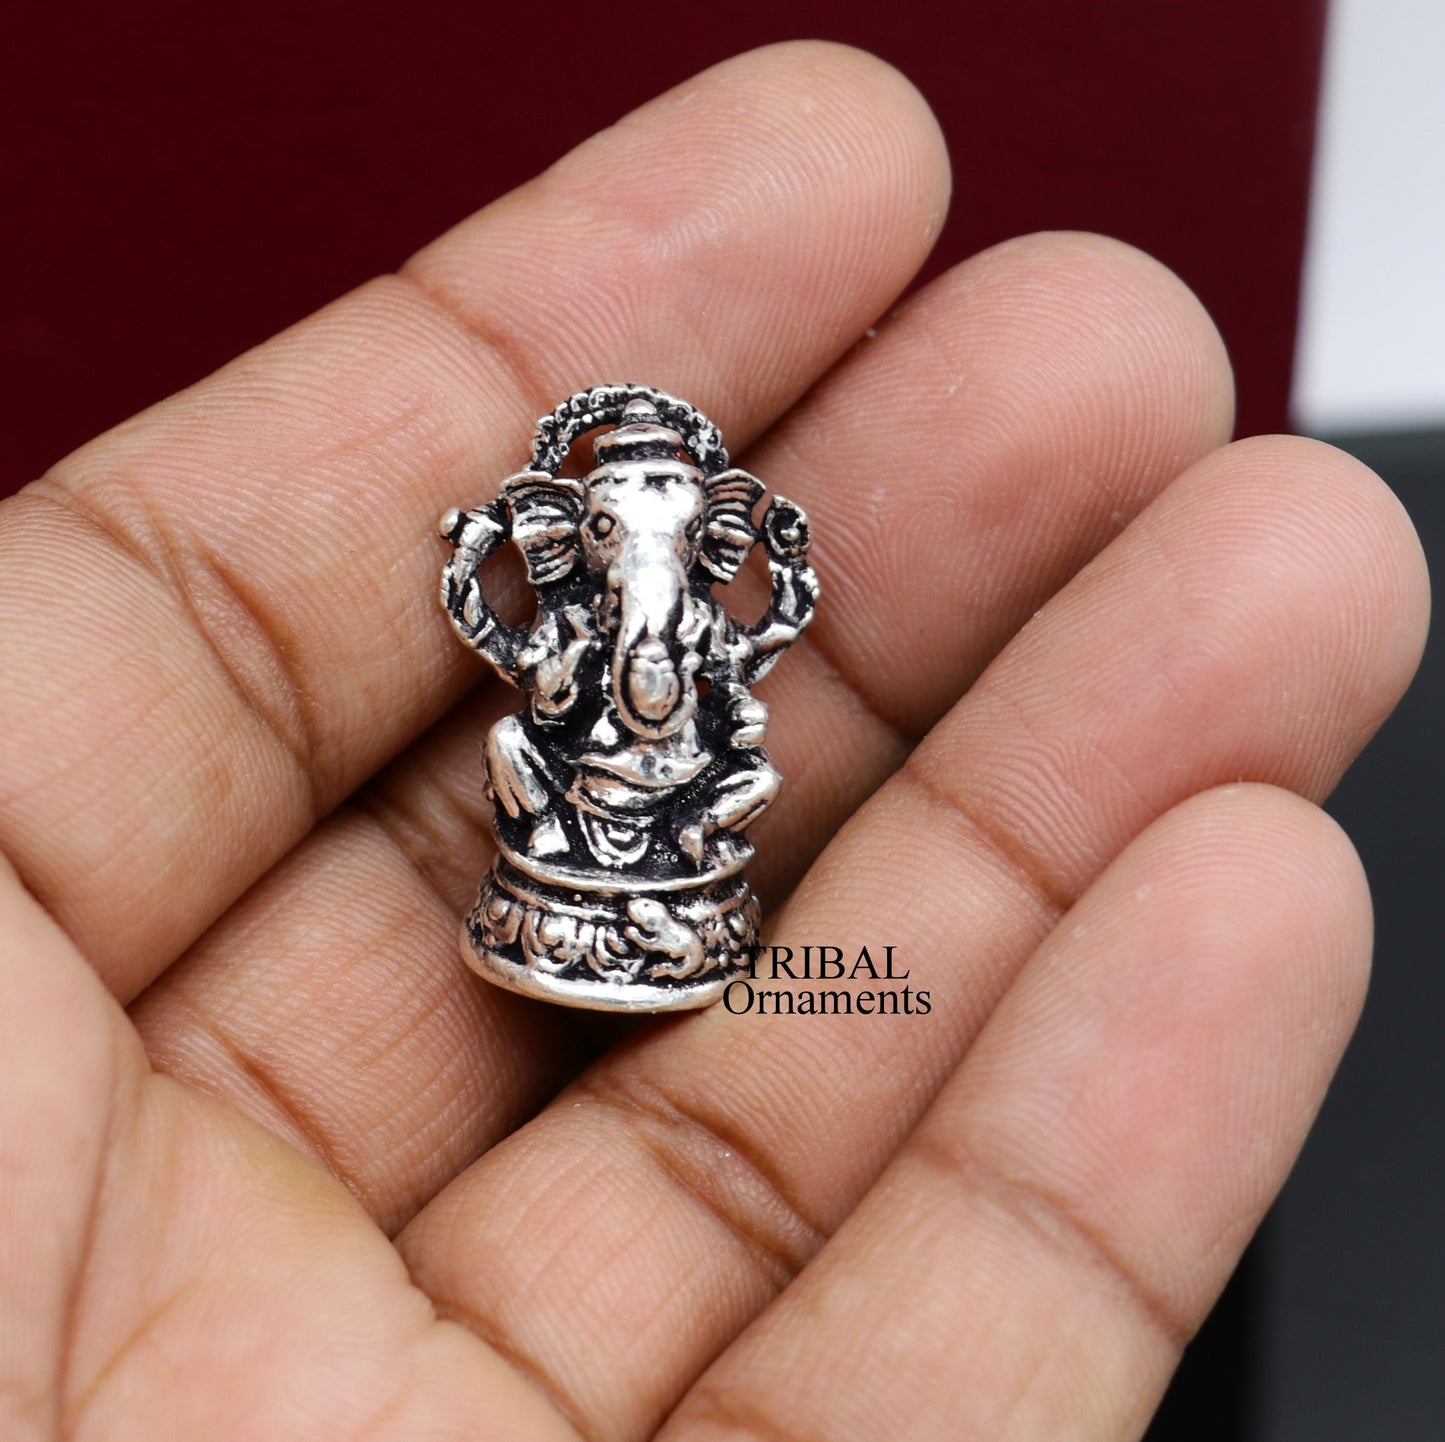 925 Sterling silver Lord Ganesh Idol small statue Figurine, handcrafted Lord Ganesh statue sculpture Diwali puja gift art503 - TRIBAL ORNAMENTS